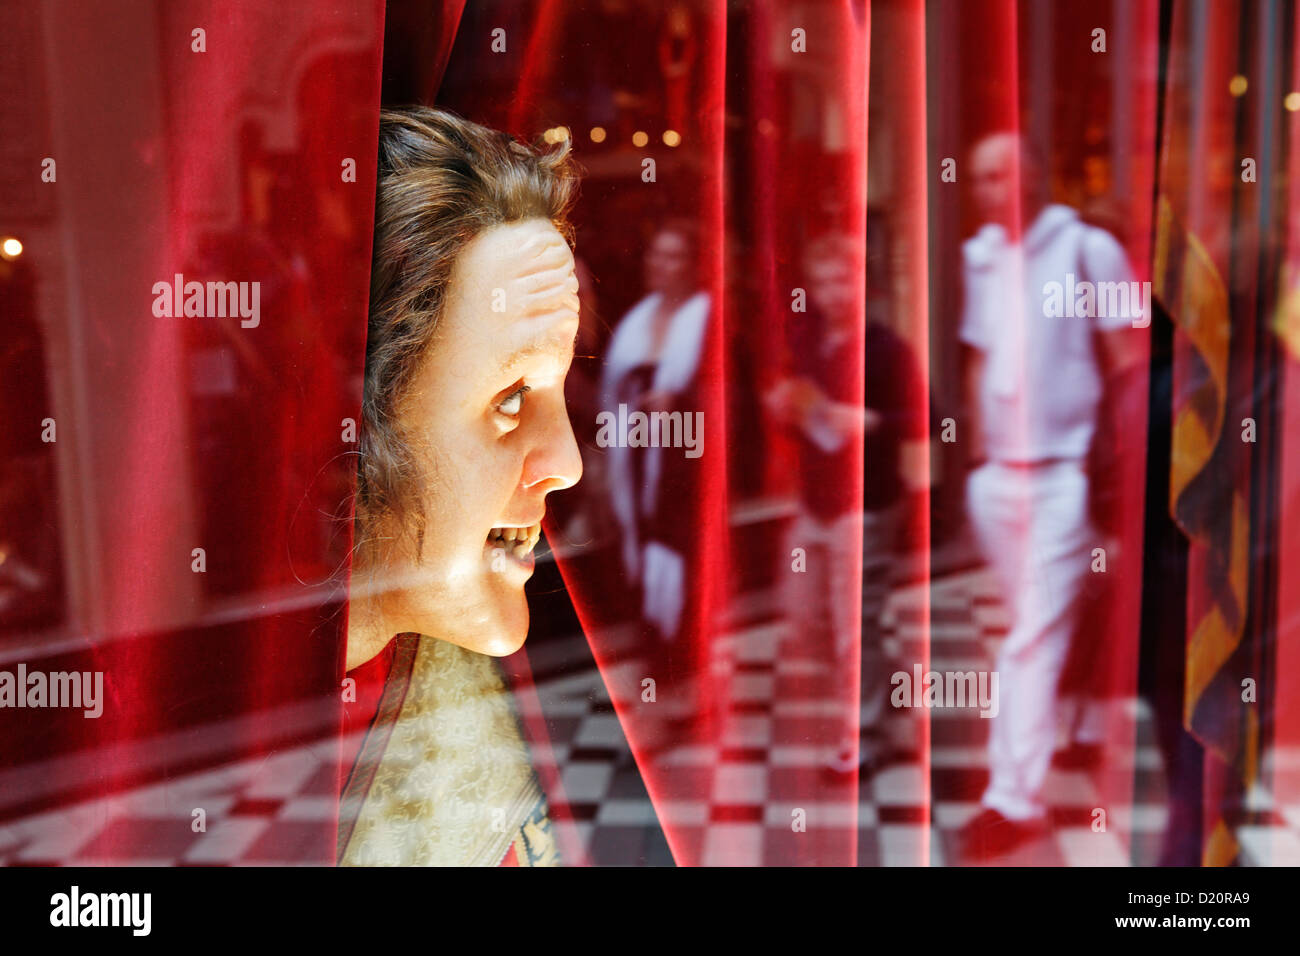 Wax figure in the window of Grevin wax museum, Galerie Verdeau, Paris, France, Europe Stock Photo